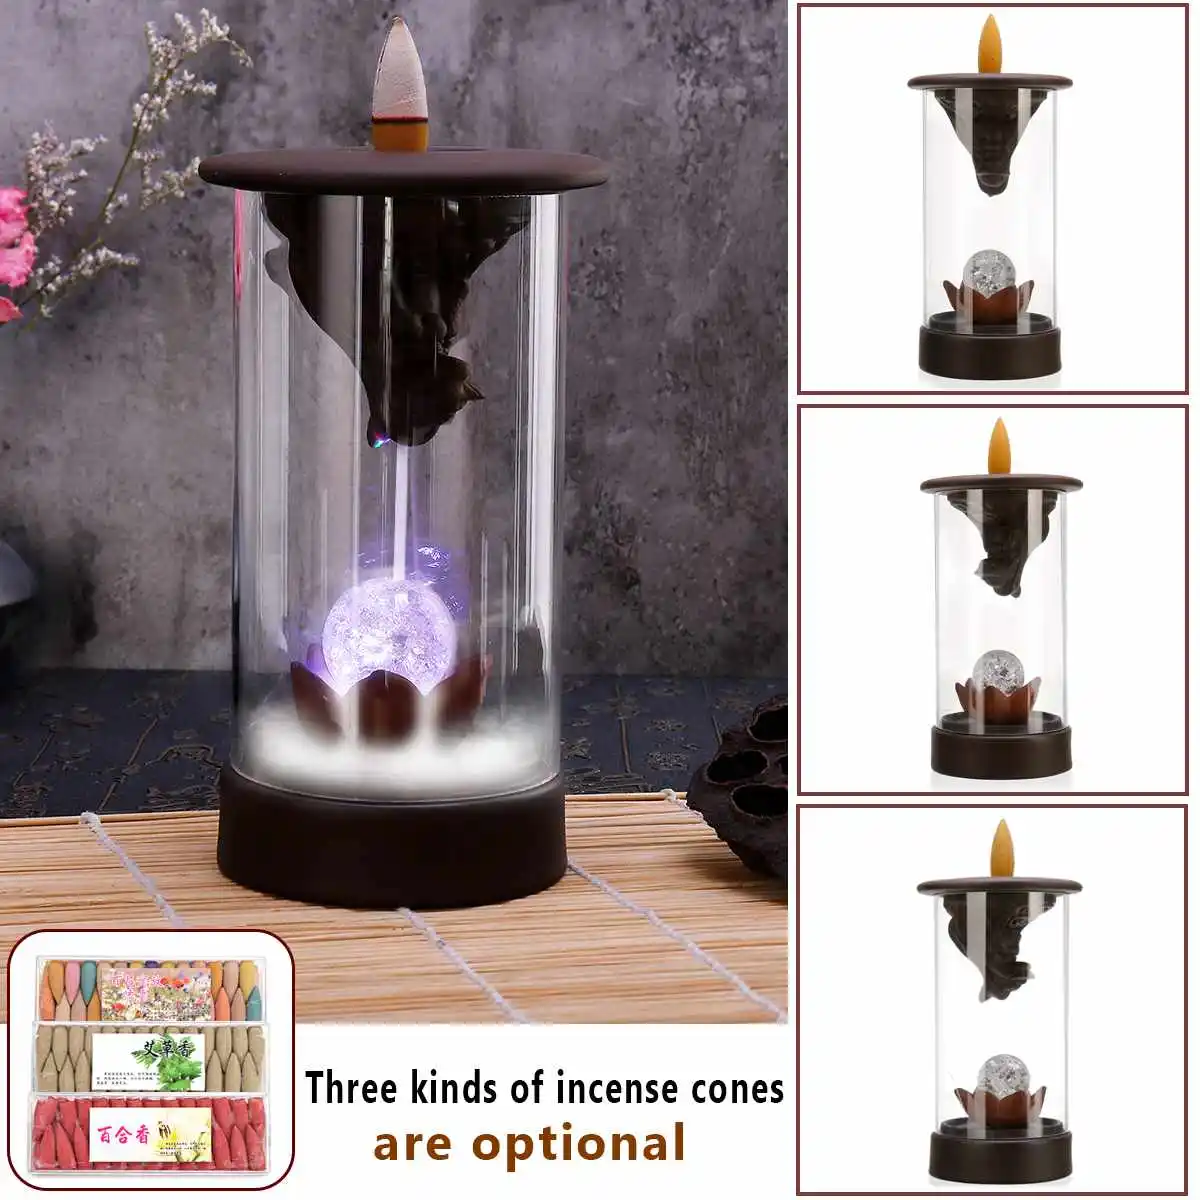 

LED Little Monk Censer Creatives Home Decor Small Buddha Incense Holder Backflow Incense Burner Use In Home Office Teahouse